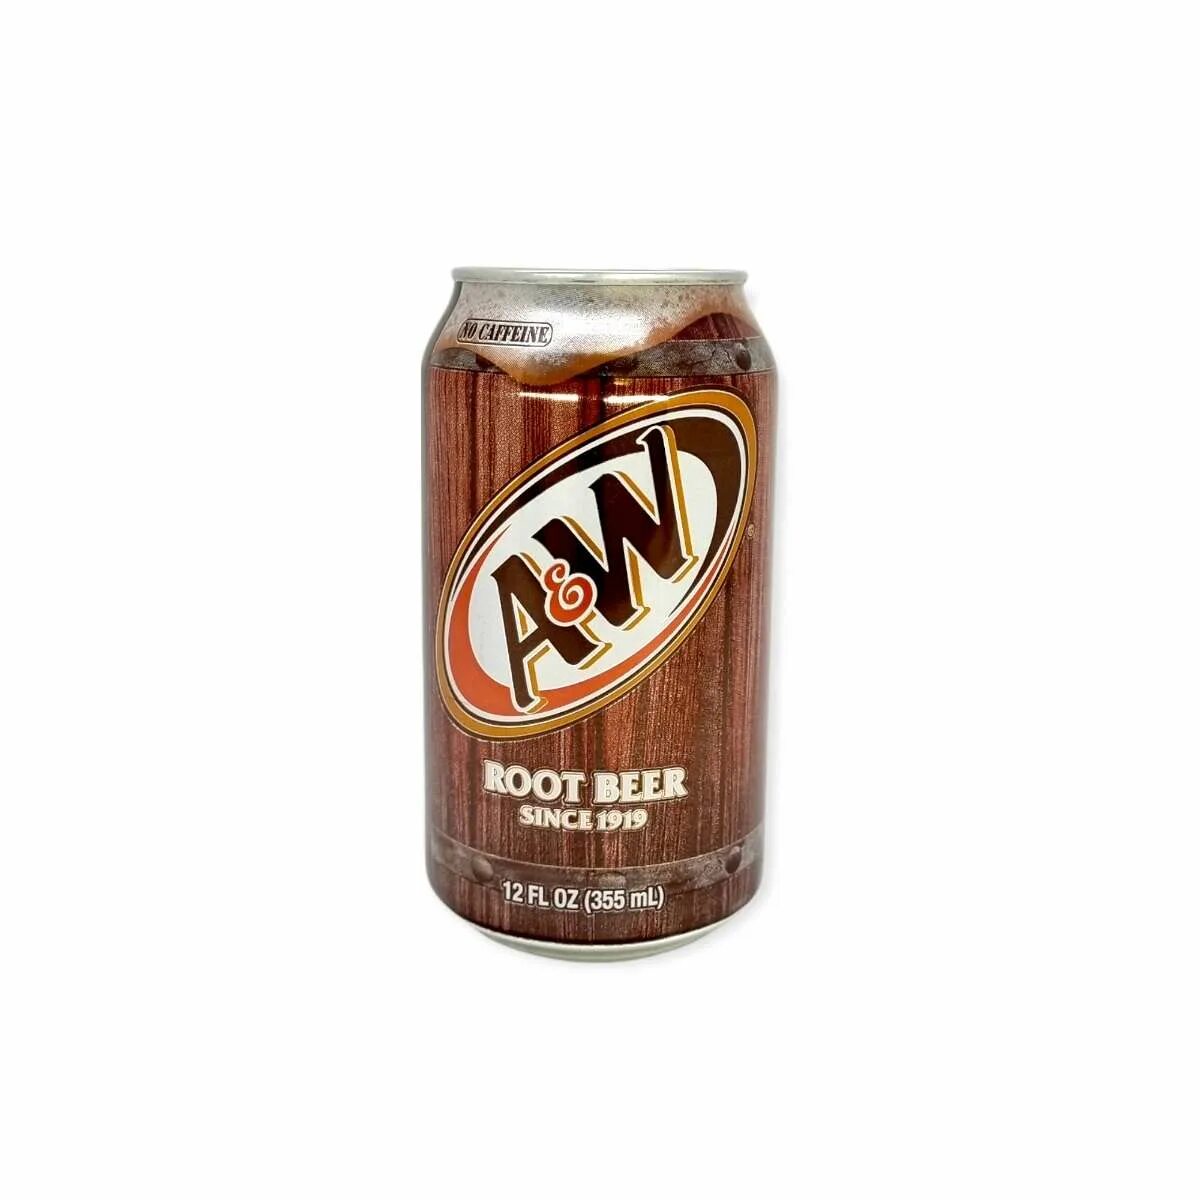 Корневое пиво. Напиток a&w root Beer 355мл*12. AW root Beer. Root Beer газировка. ГАЗ. Напиток a&w root Beer 325мл.